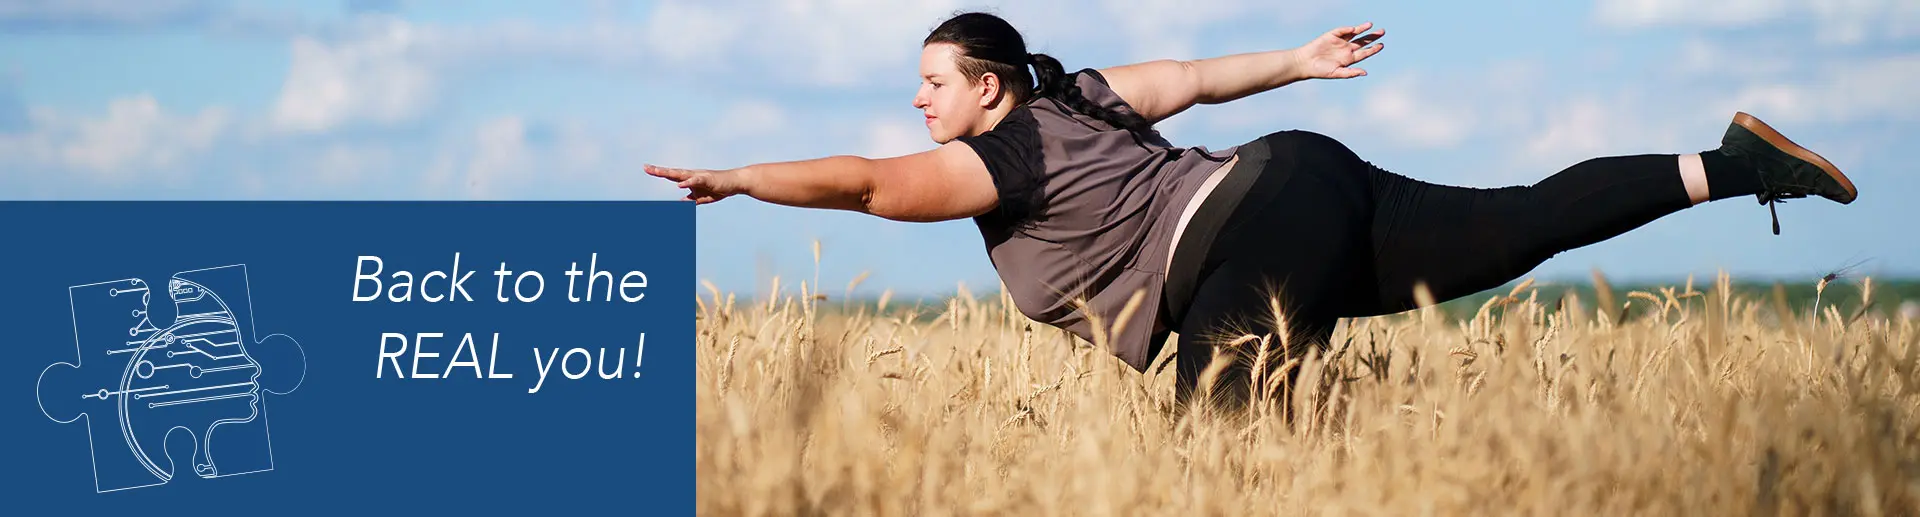 WOMAN EXERCISING IN WHEAT FIELD